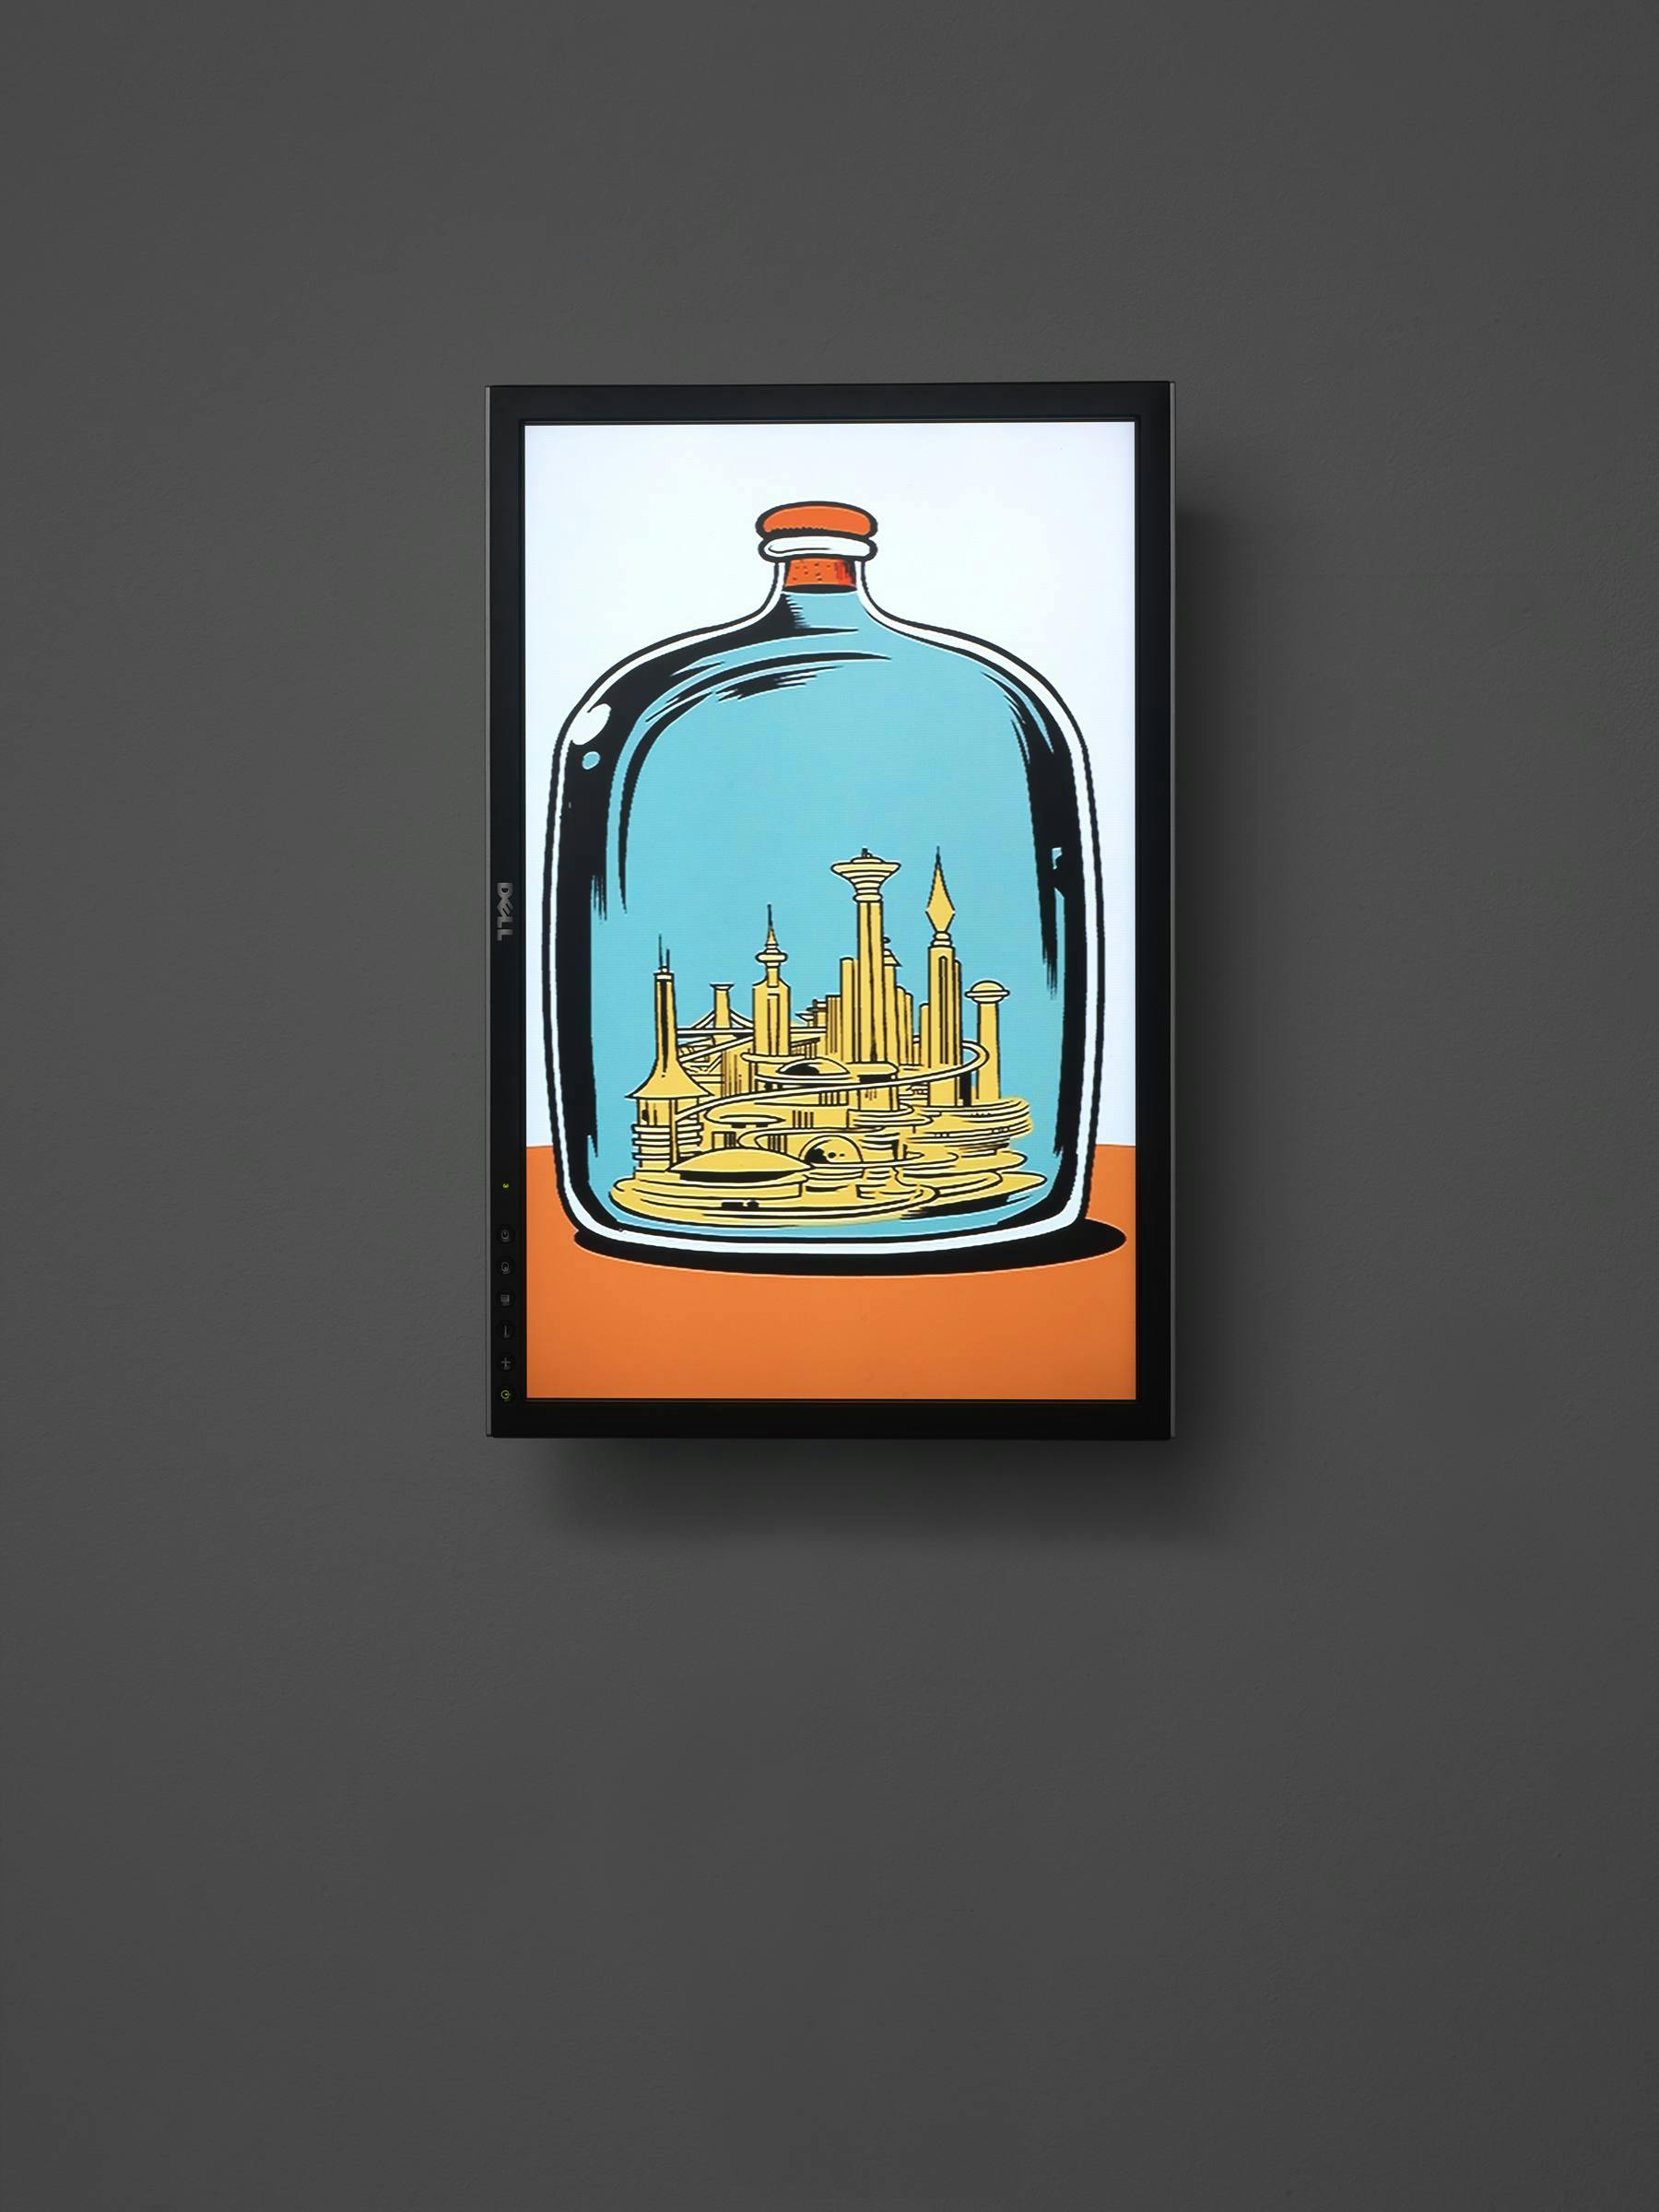 Image of a TV mounted on a grey wall. The TV shows a cartoon-like image of a blue bottle with yellow objects inside, set on an orange scape.